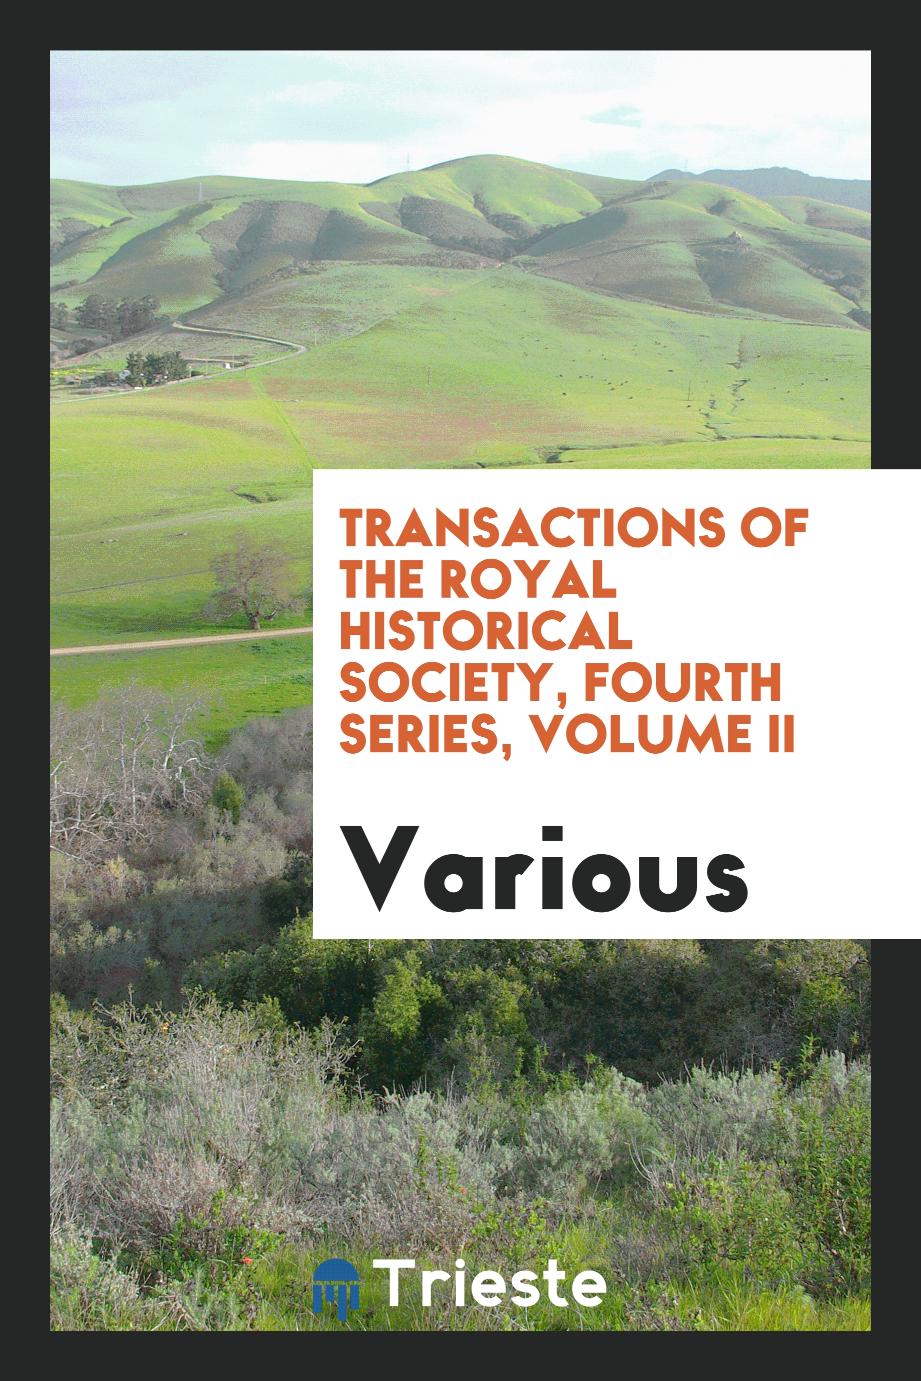 Transactions of the Royal Historical Society, Fourth Series, Volume II